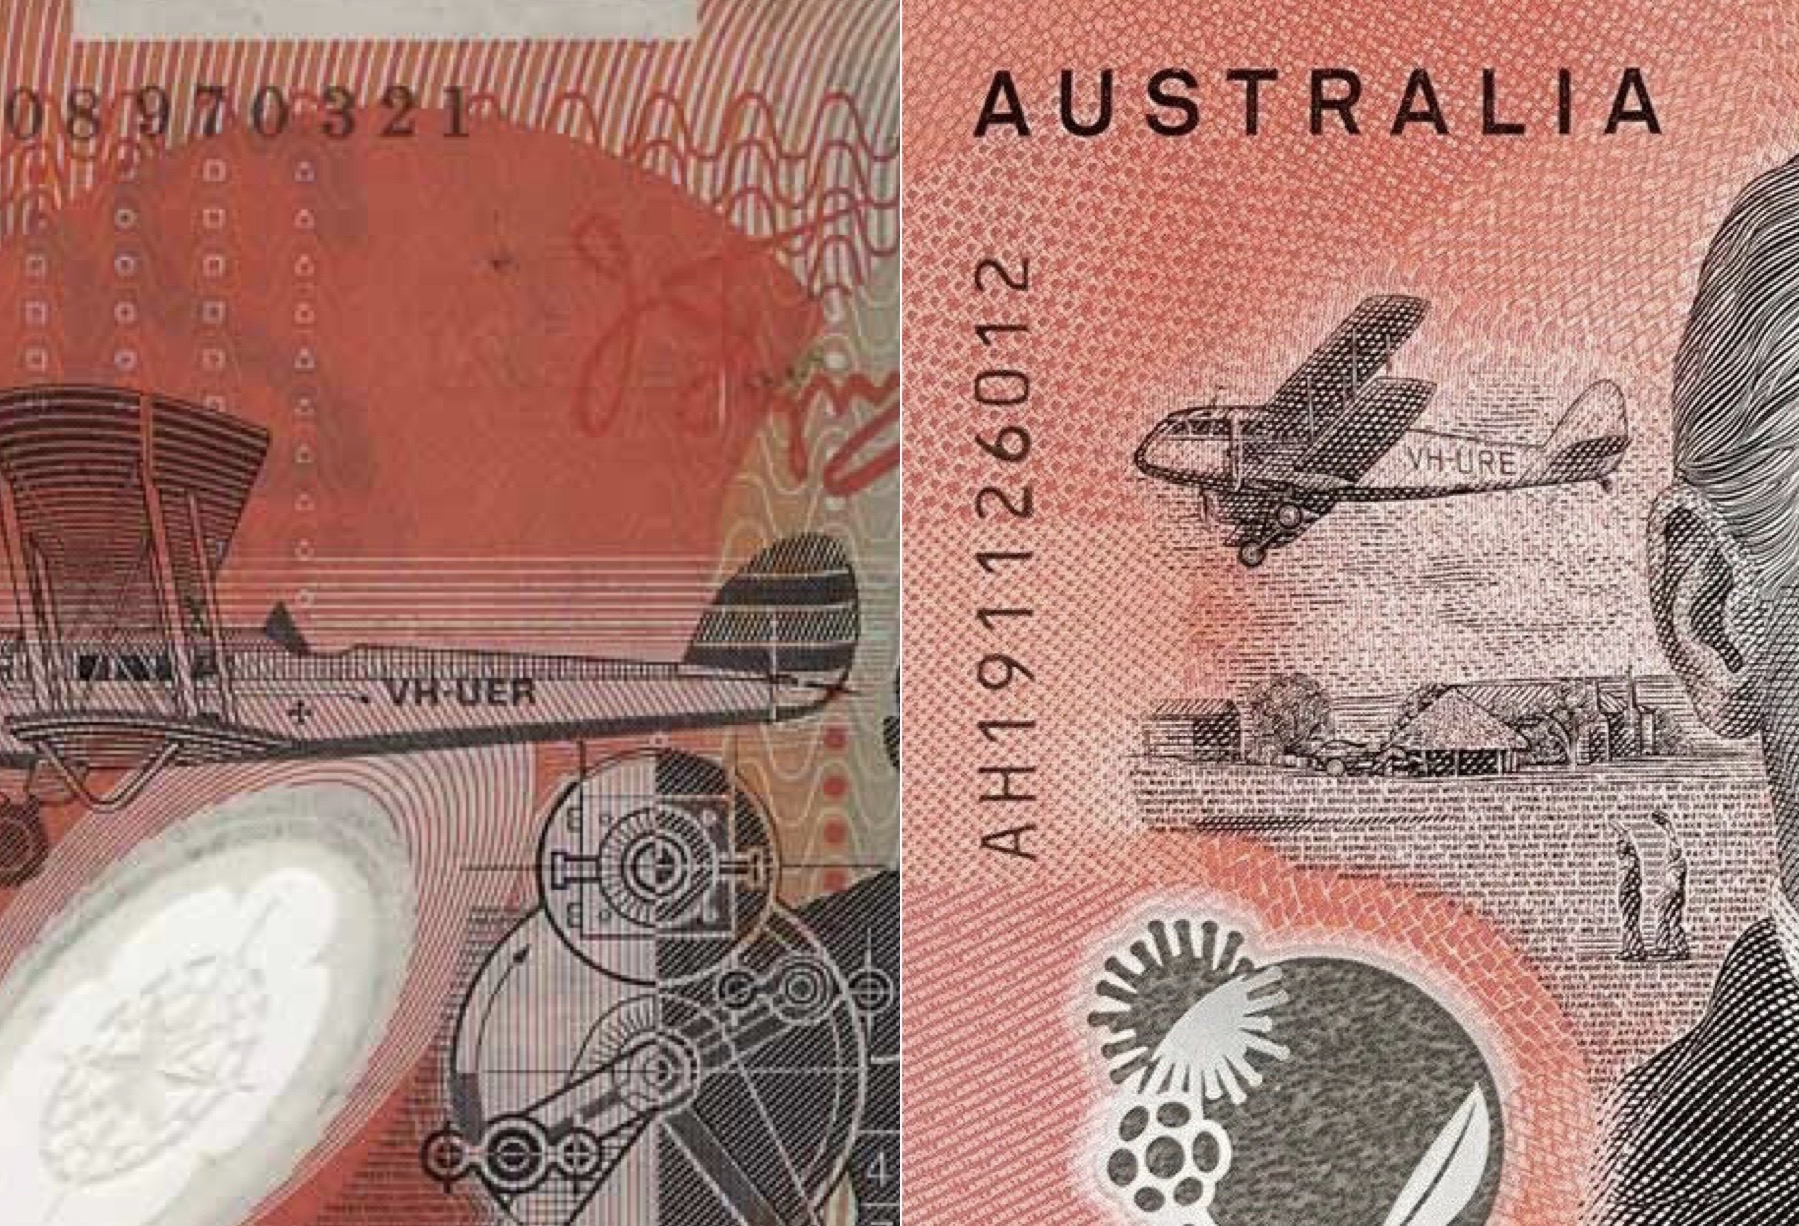 Why is the plane different on the new $20 note